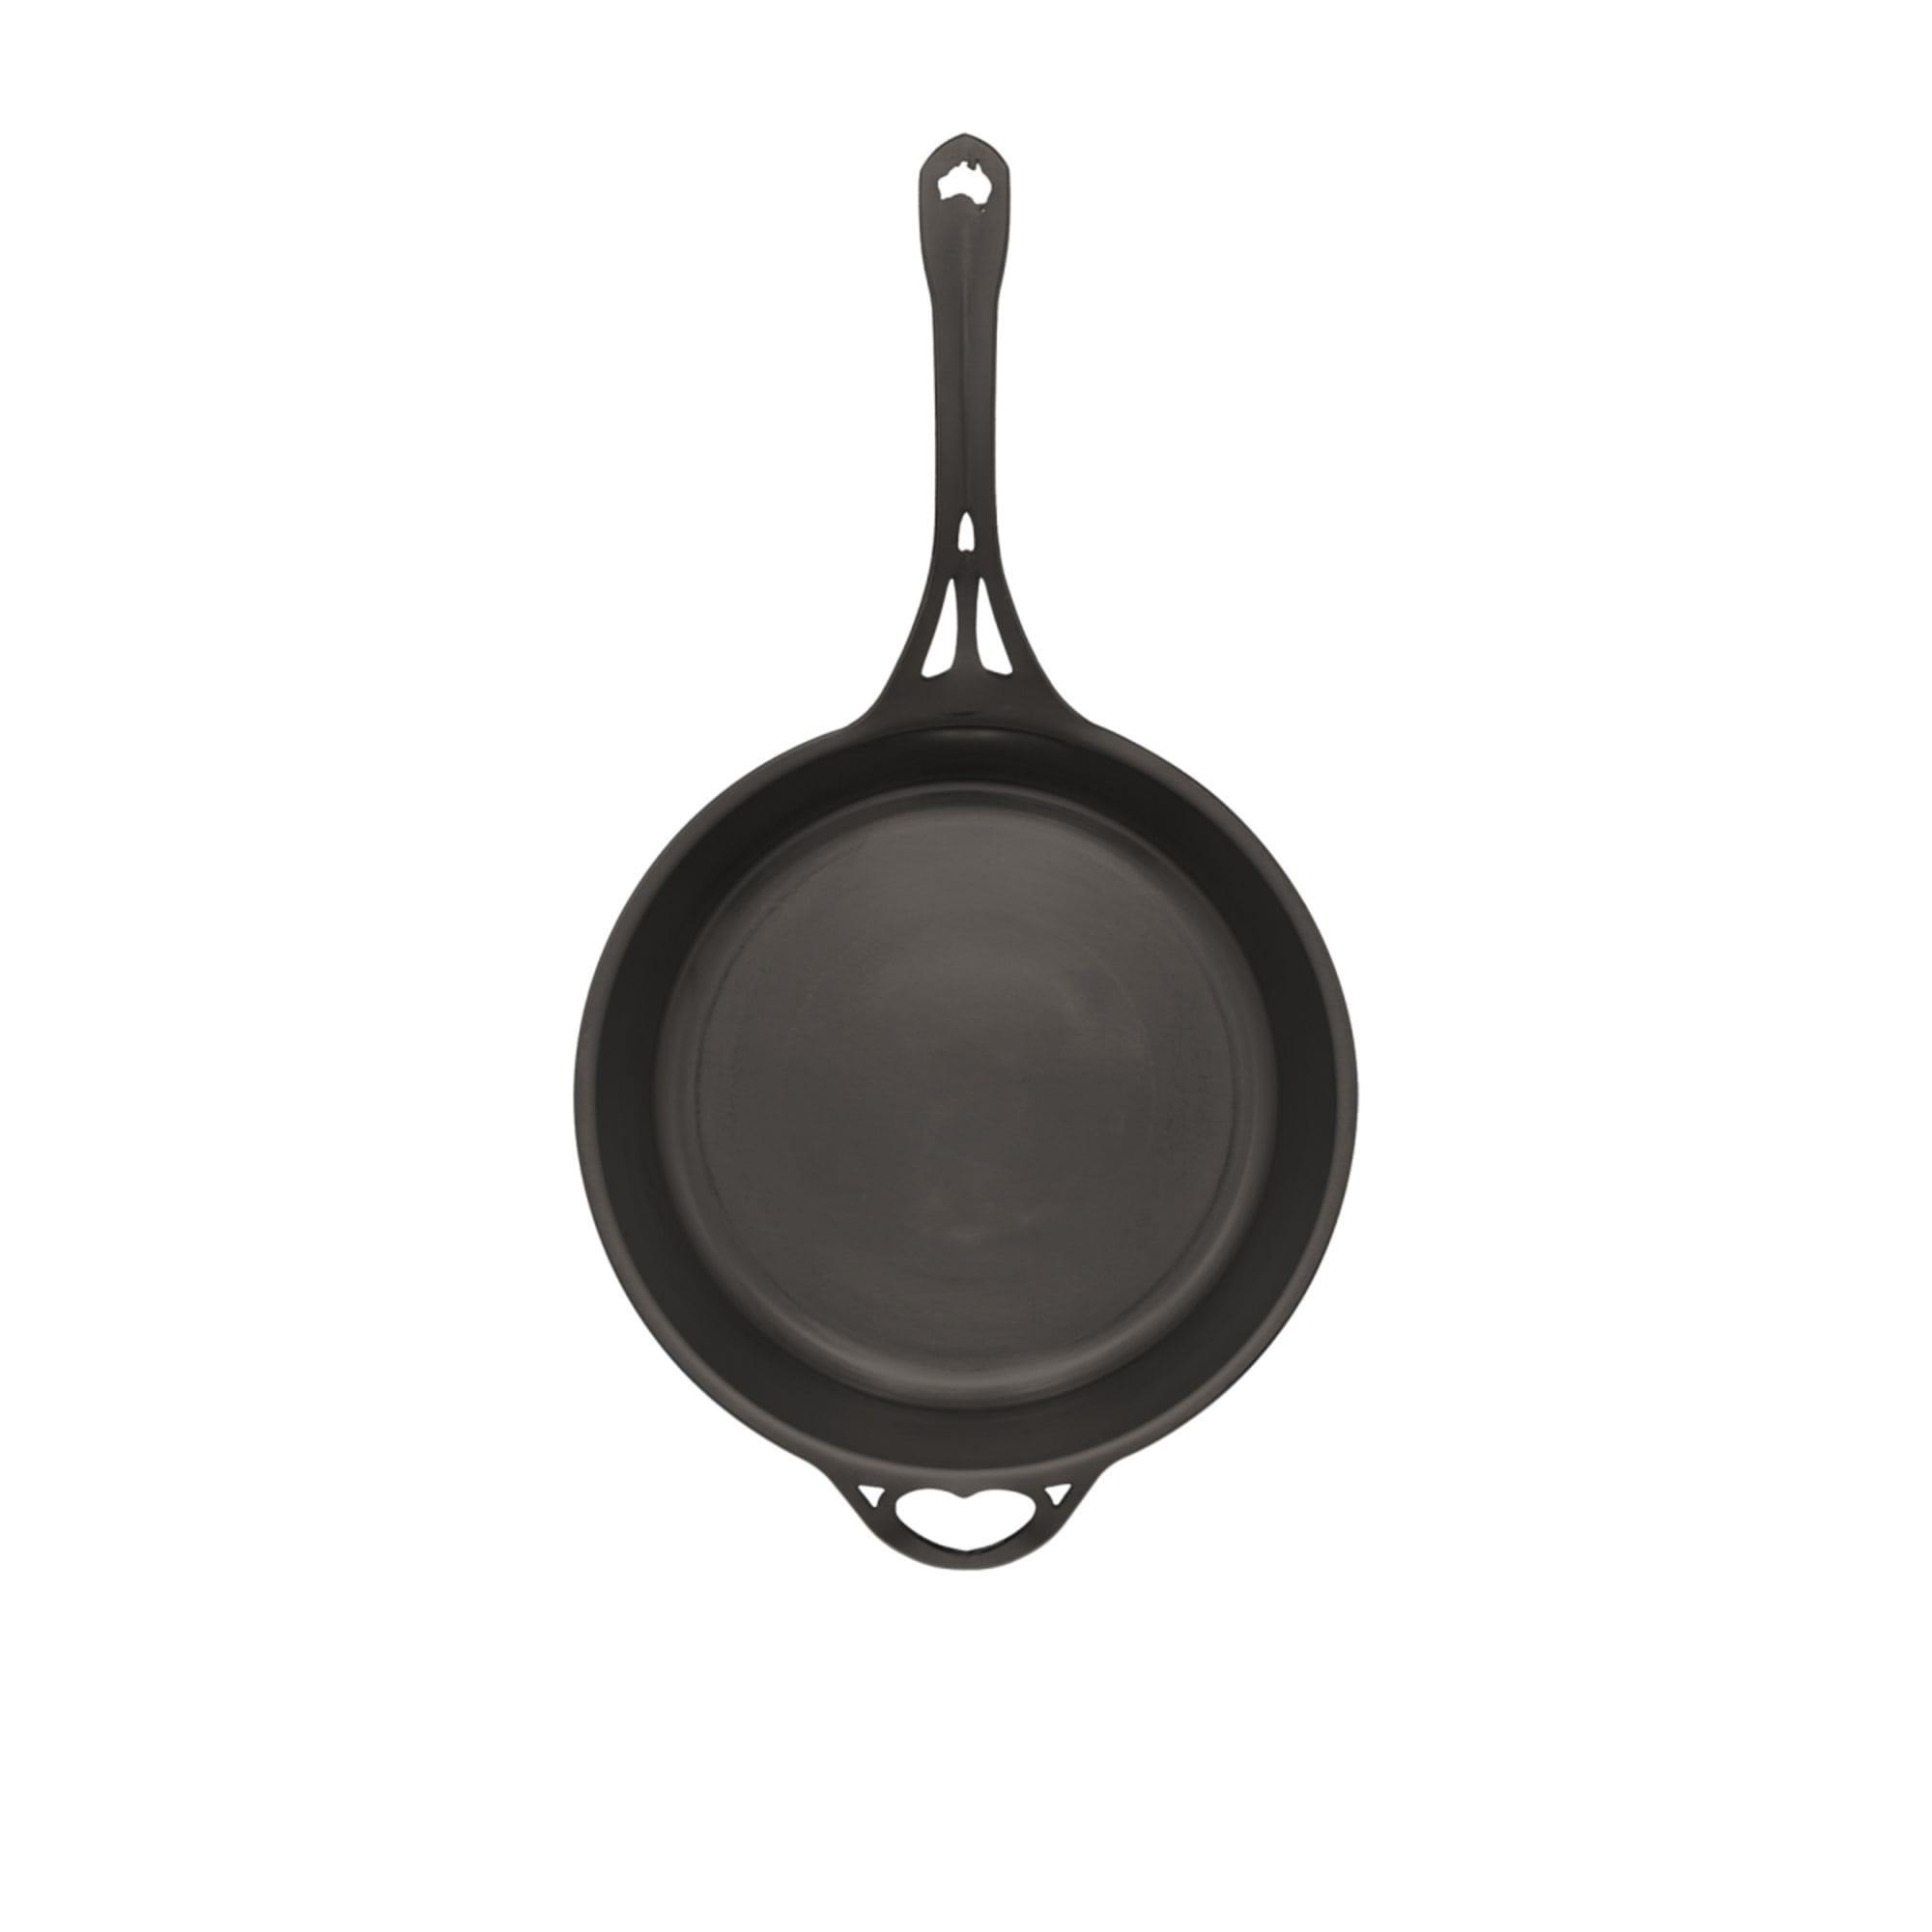 Solidteknics AUS-ION XHD Frypan with Quenched Finish 31cm Image 2